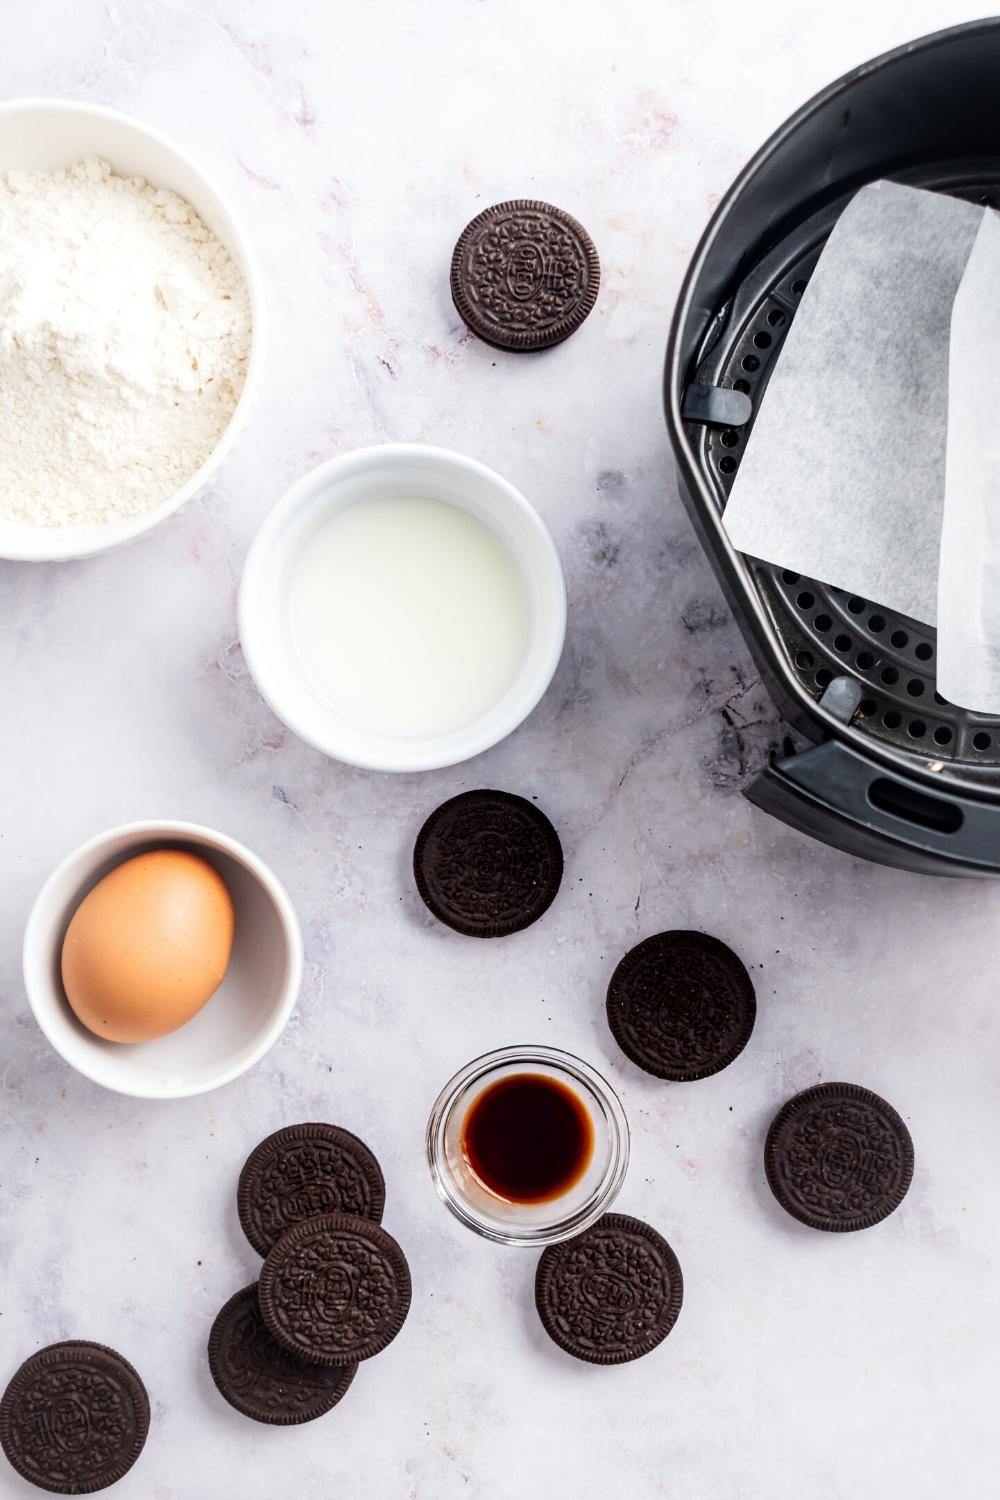 Several Oreos, a cup of vanilla extract, a cup with an egg in it, a cup filled with milk, part of a bowl filled with pancake batter, and part of an air fryer with parchment paper in it all on a white counter.